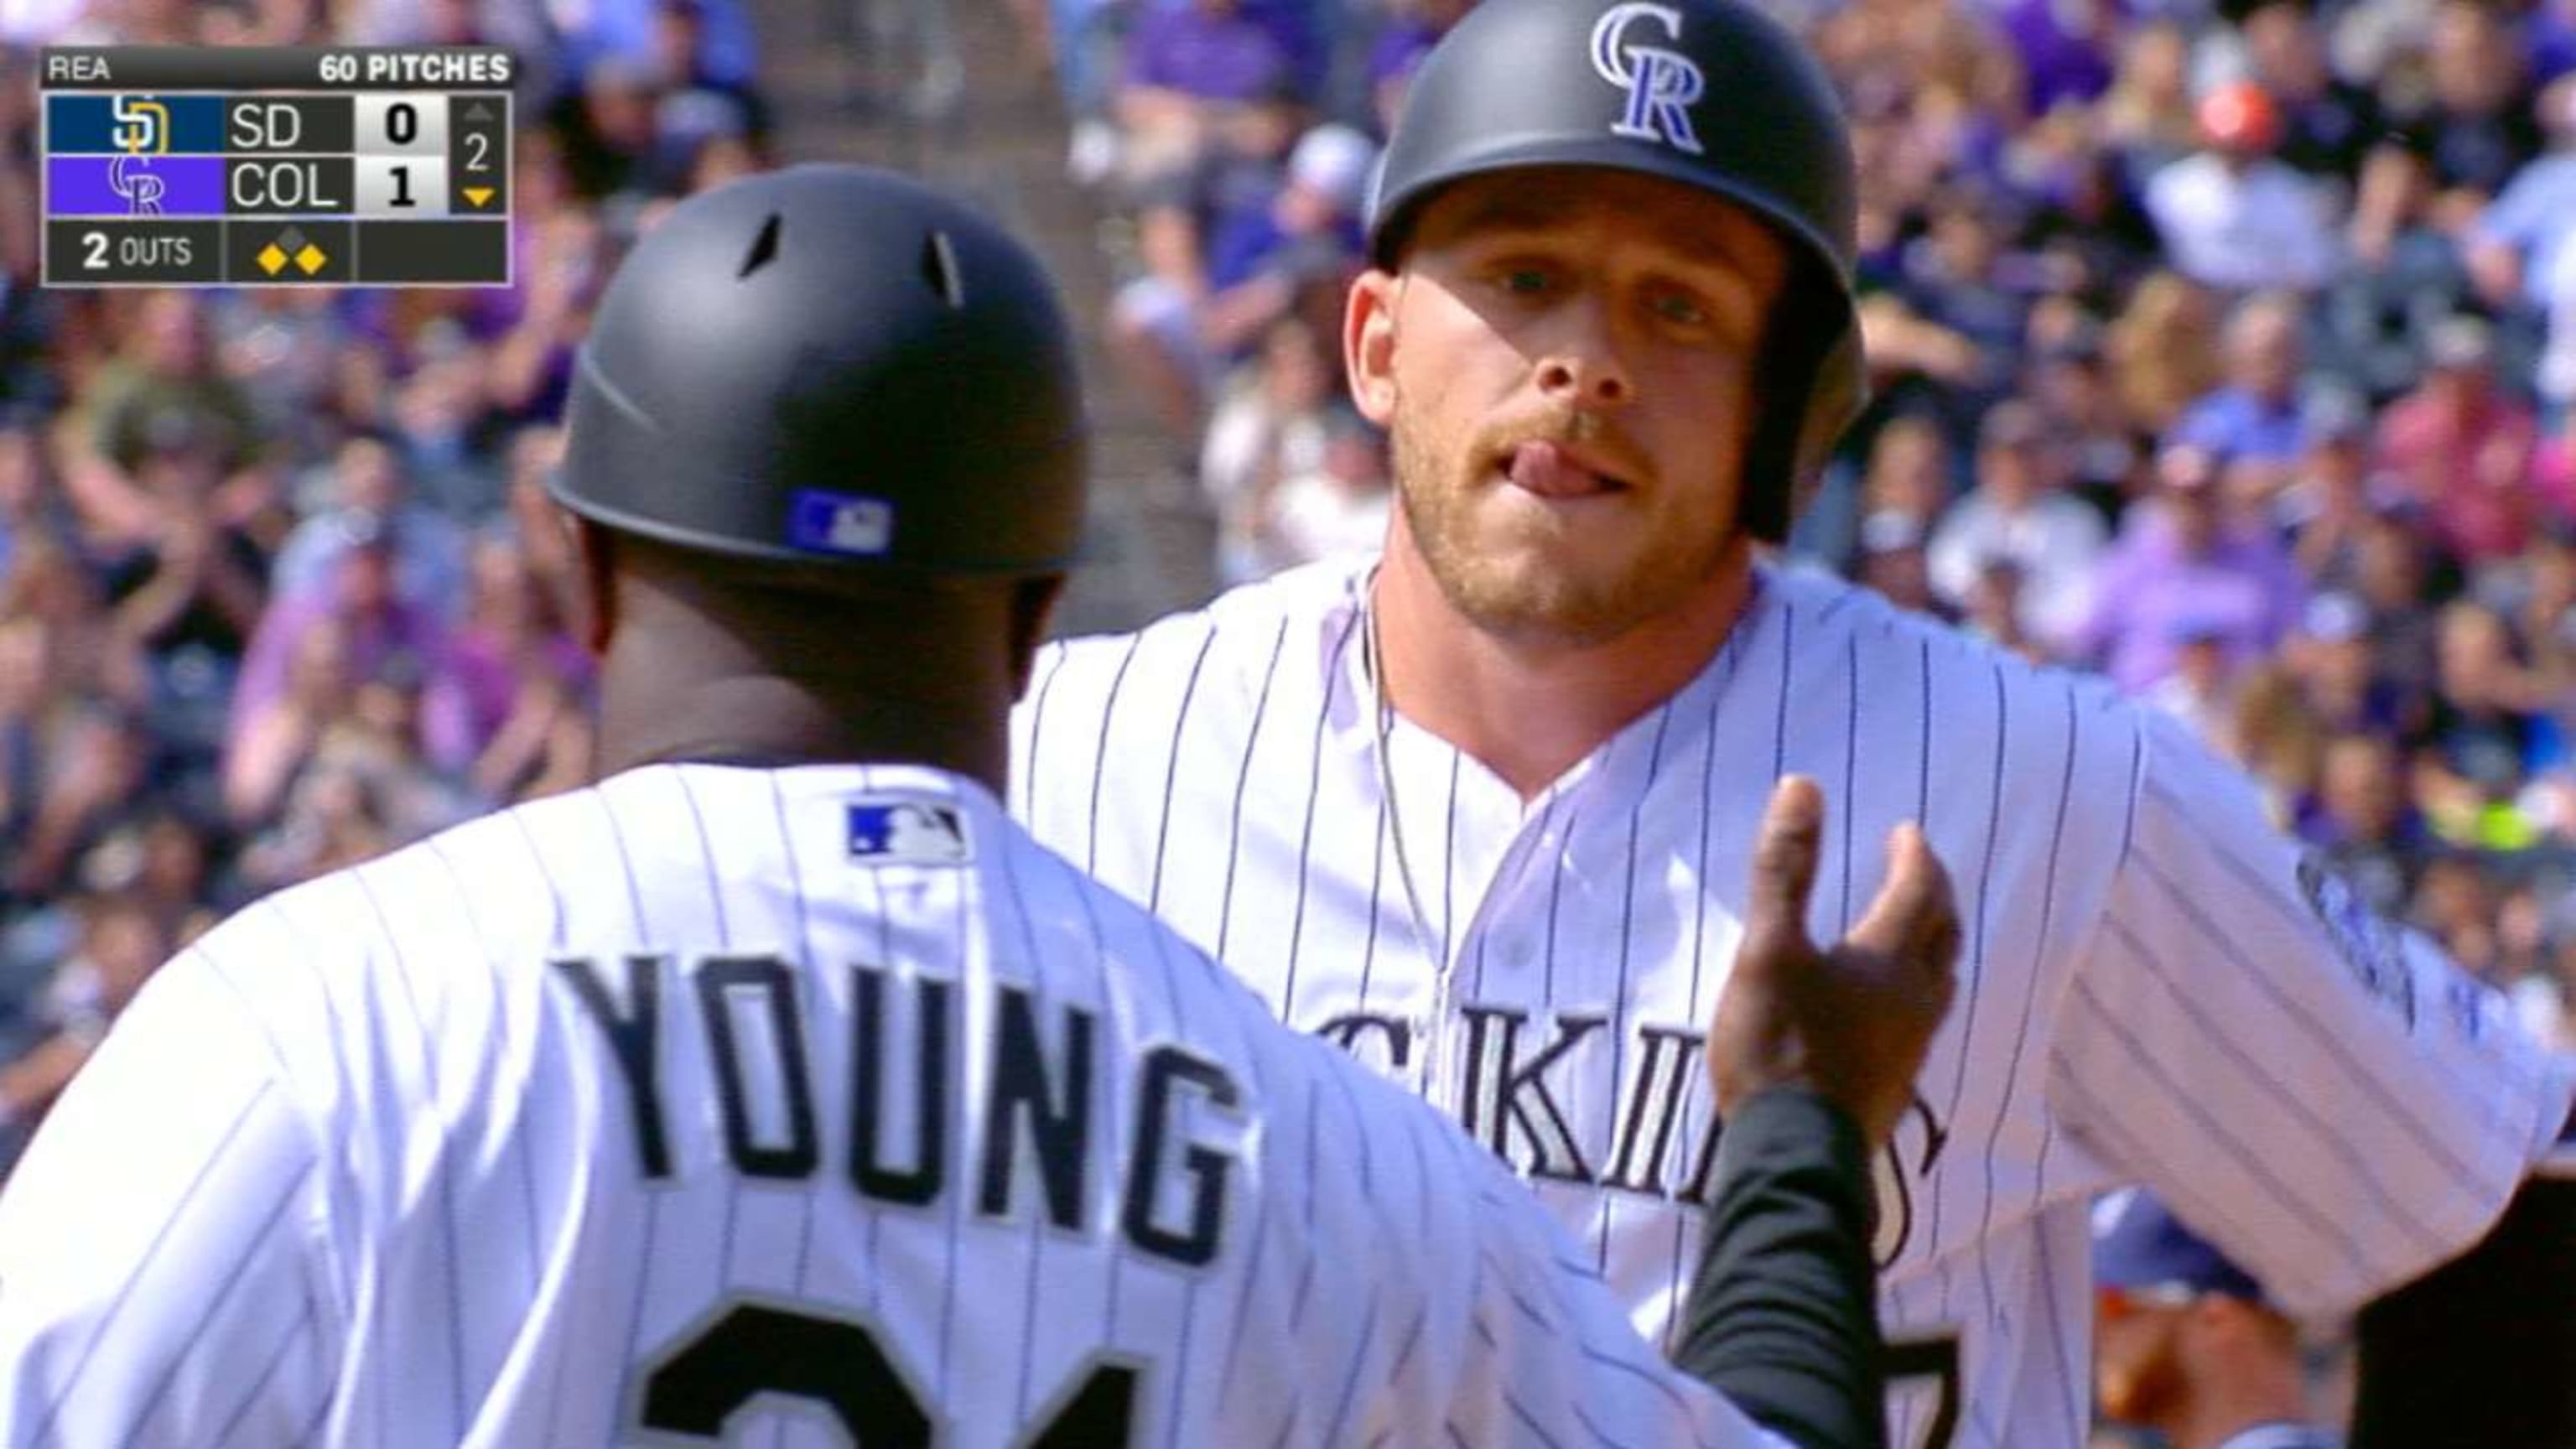 Trevor Story's career night carries Rockies to 13-6 win over Blue Jays